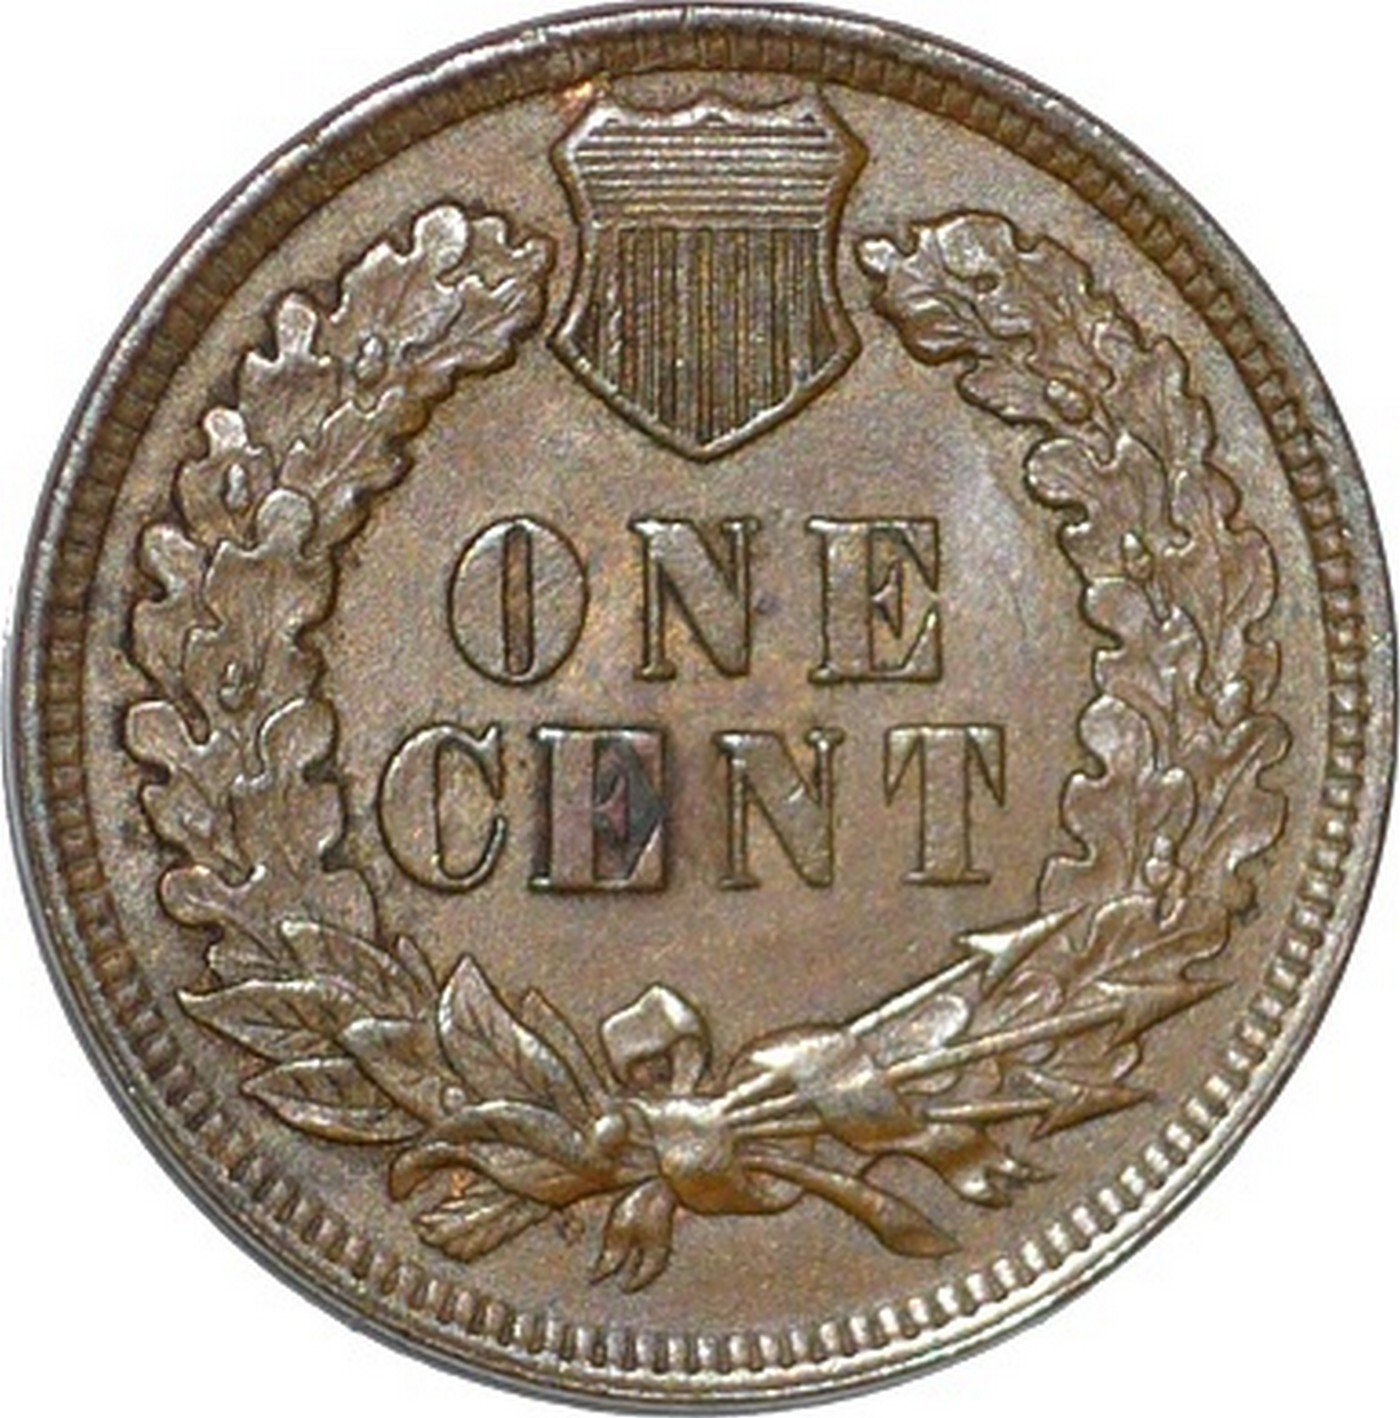 1898 Reverse of RPD-005 - Indian Head Penny - Photo by David Poliquin